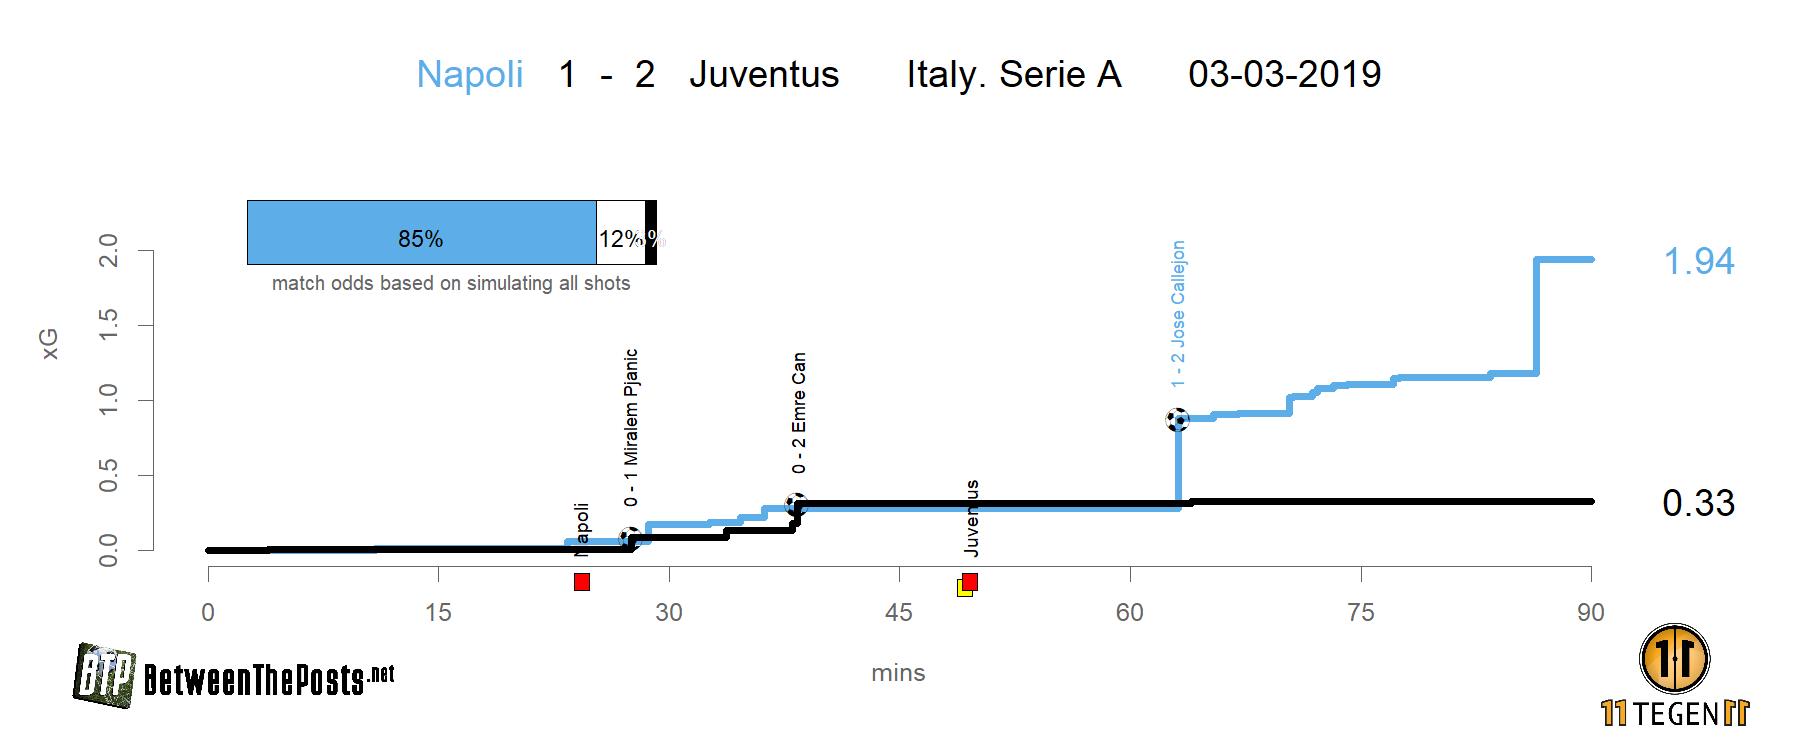 Expected goals plot Napoli Juventus 1-2 Serie A